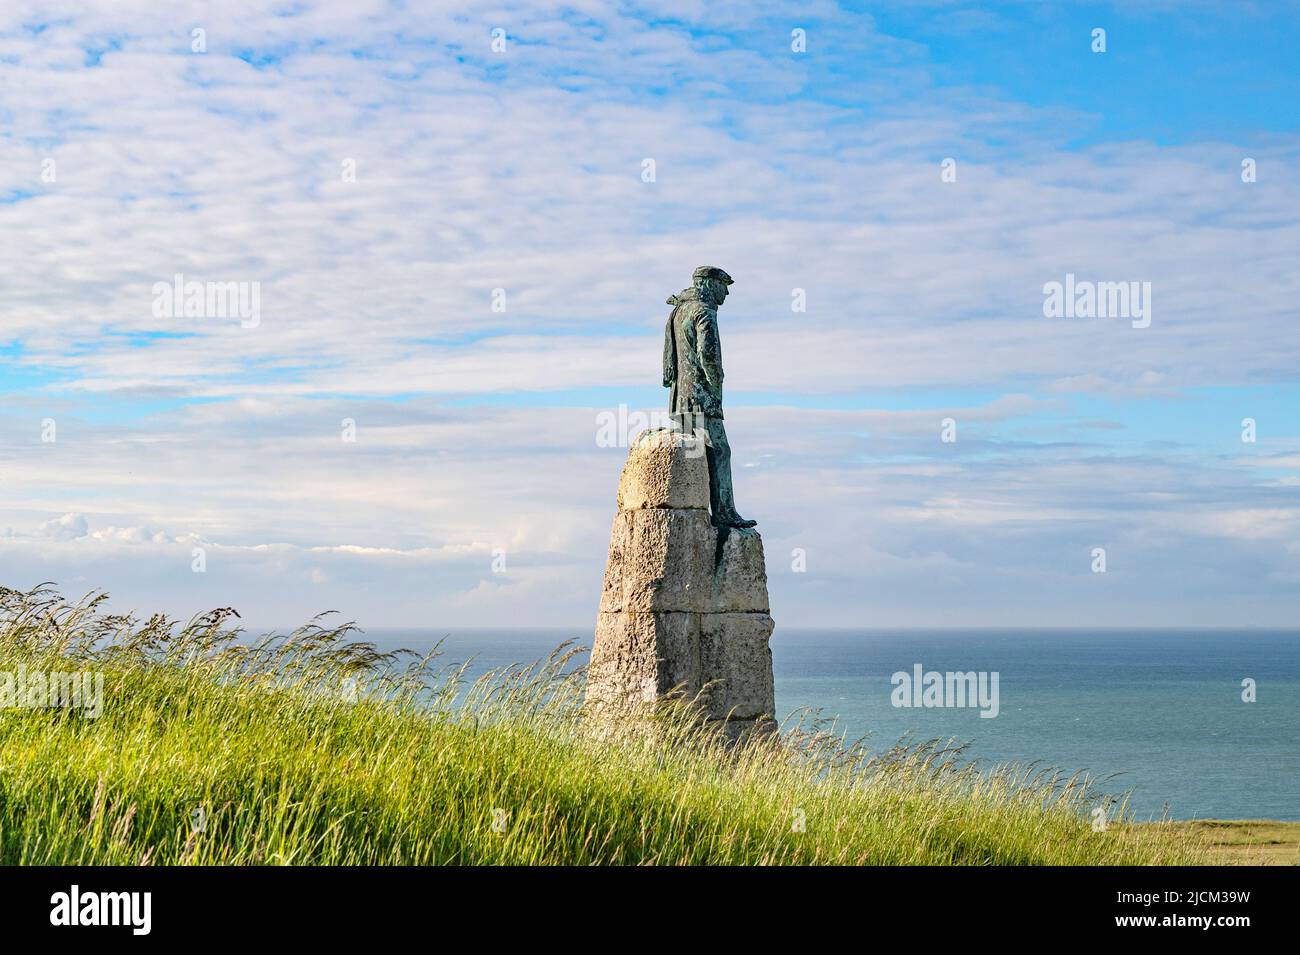 Sculpture of the French pilot Arthur Charles Hubert Latham at the cliff Gris-Nez on the Opal Coast (Côte d'Opale), France Stock Photo